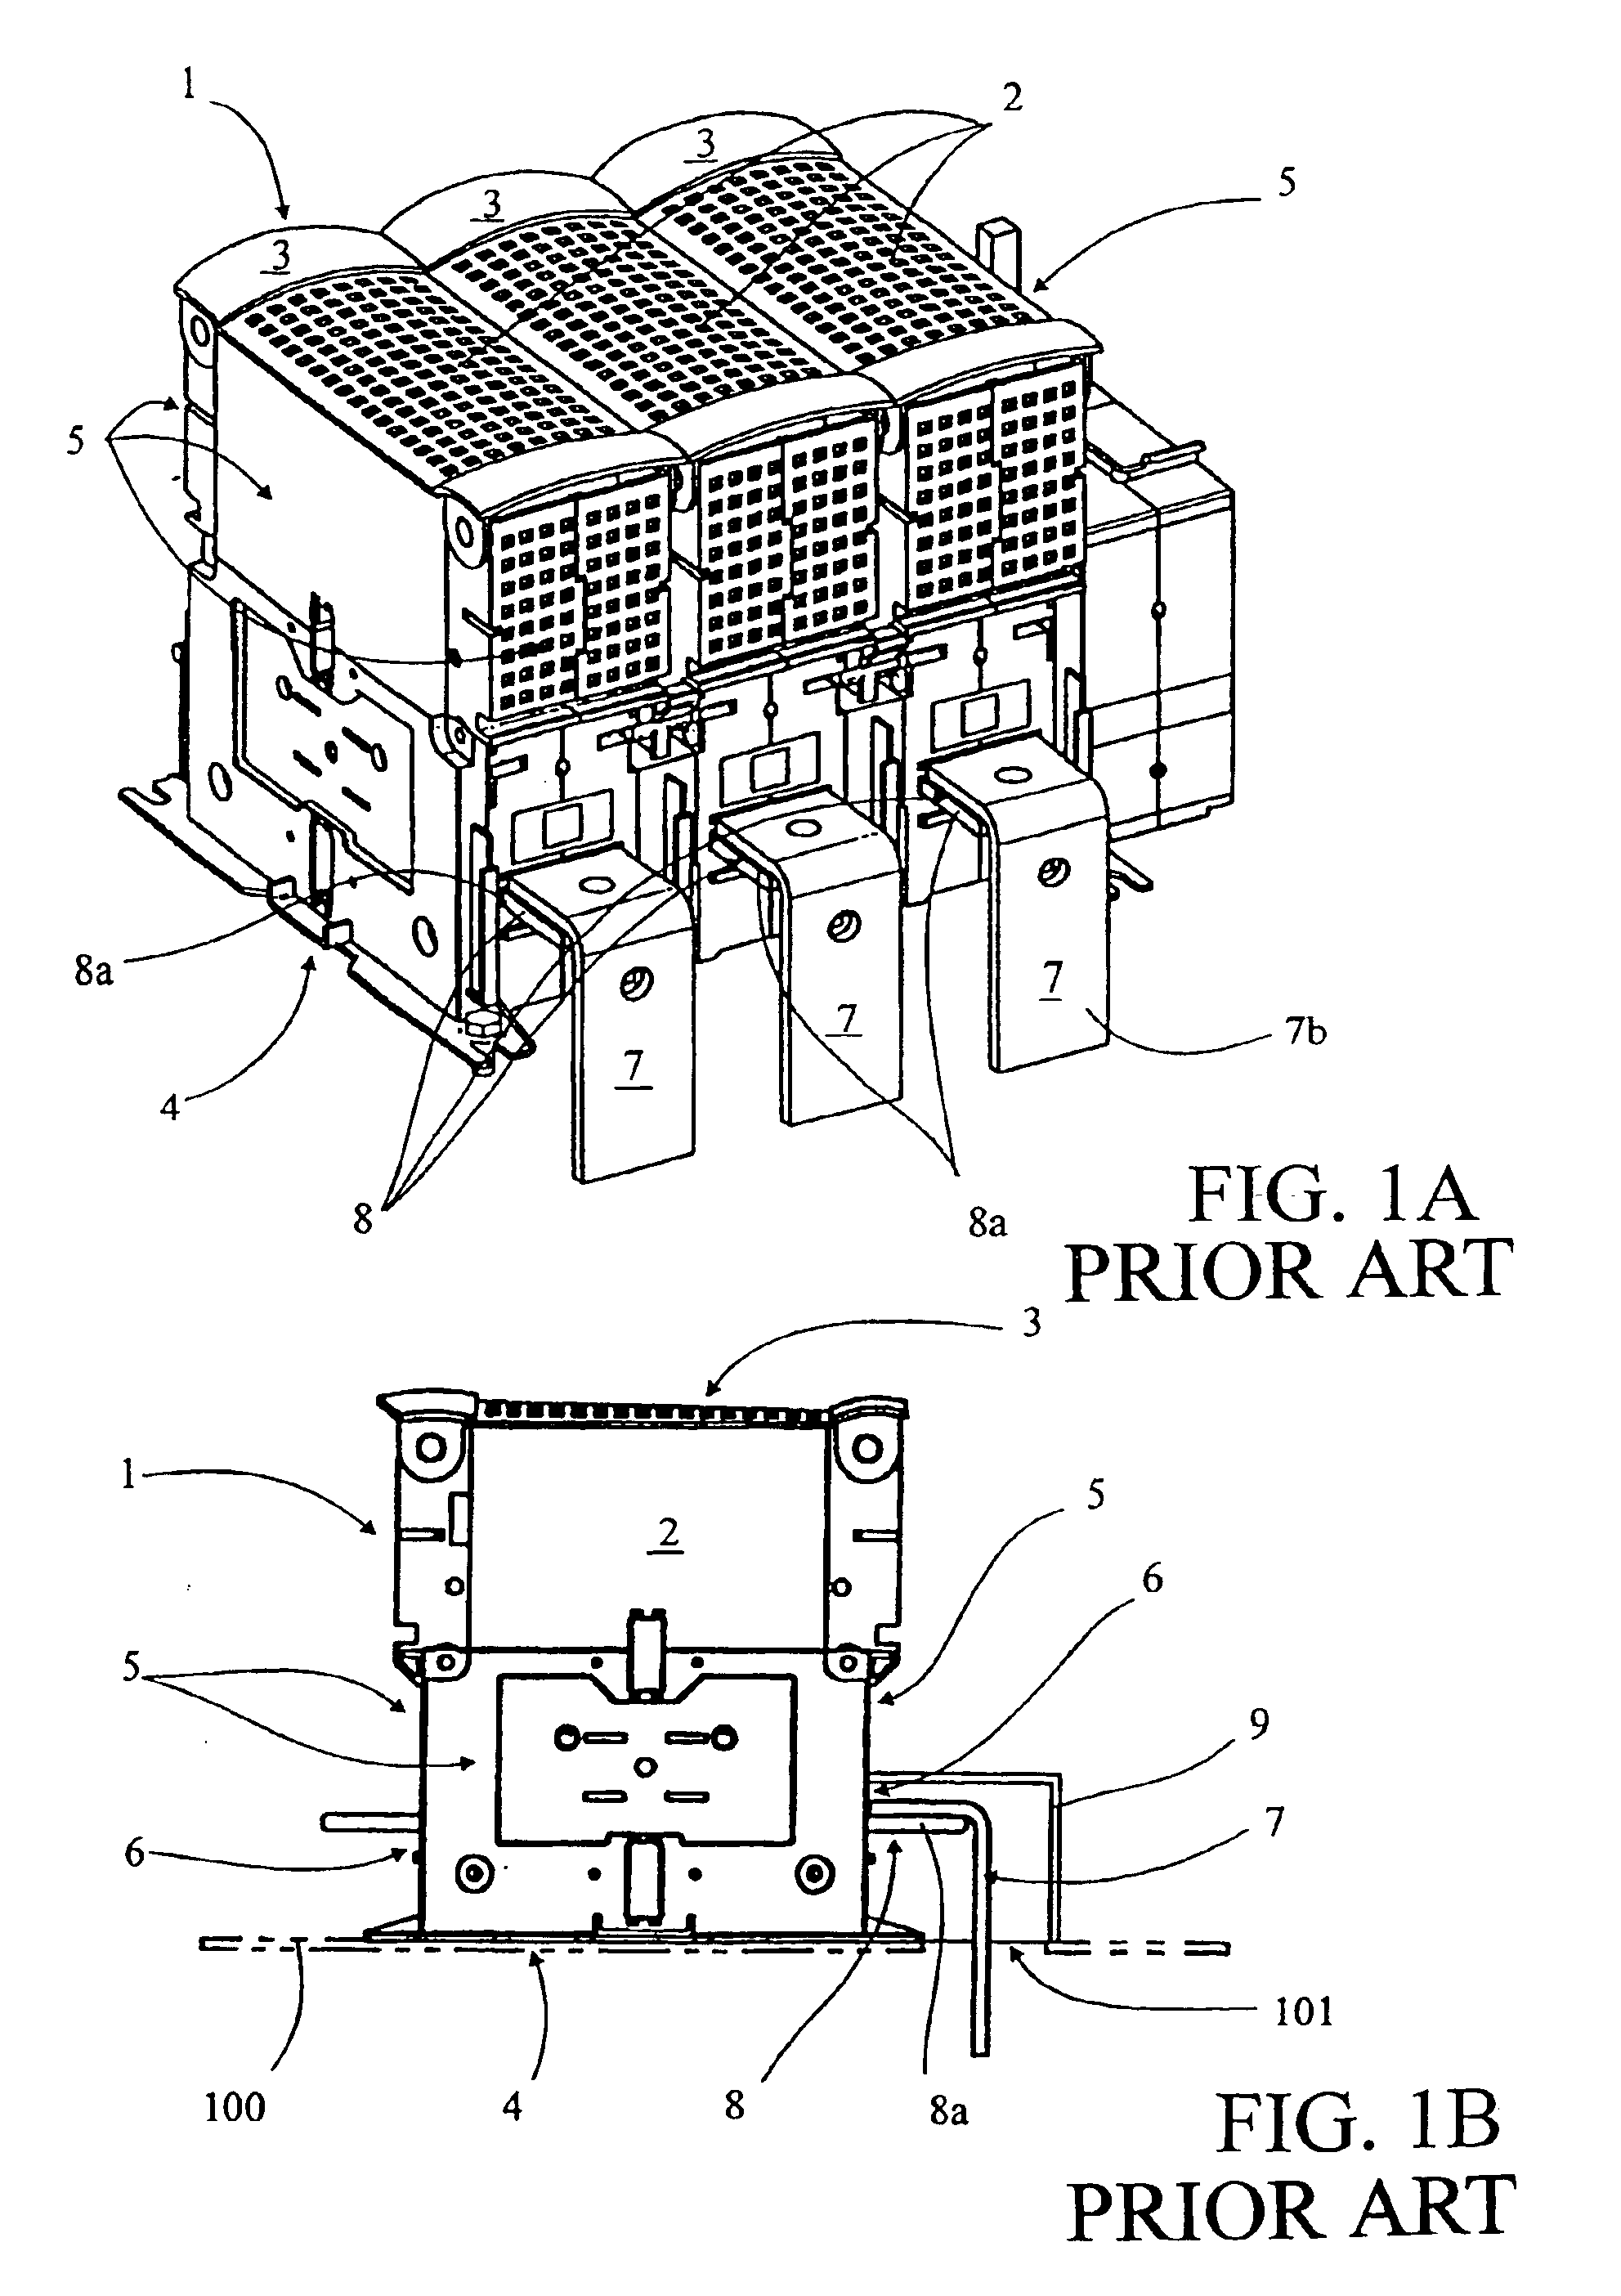 Electrical apparatus intended for mounting on a subframe